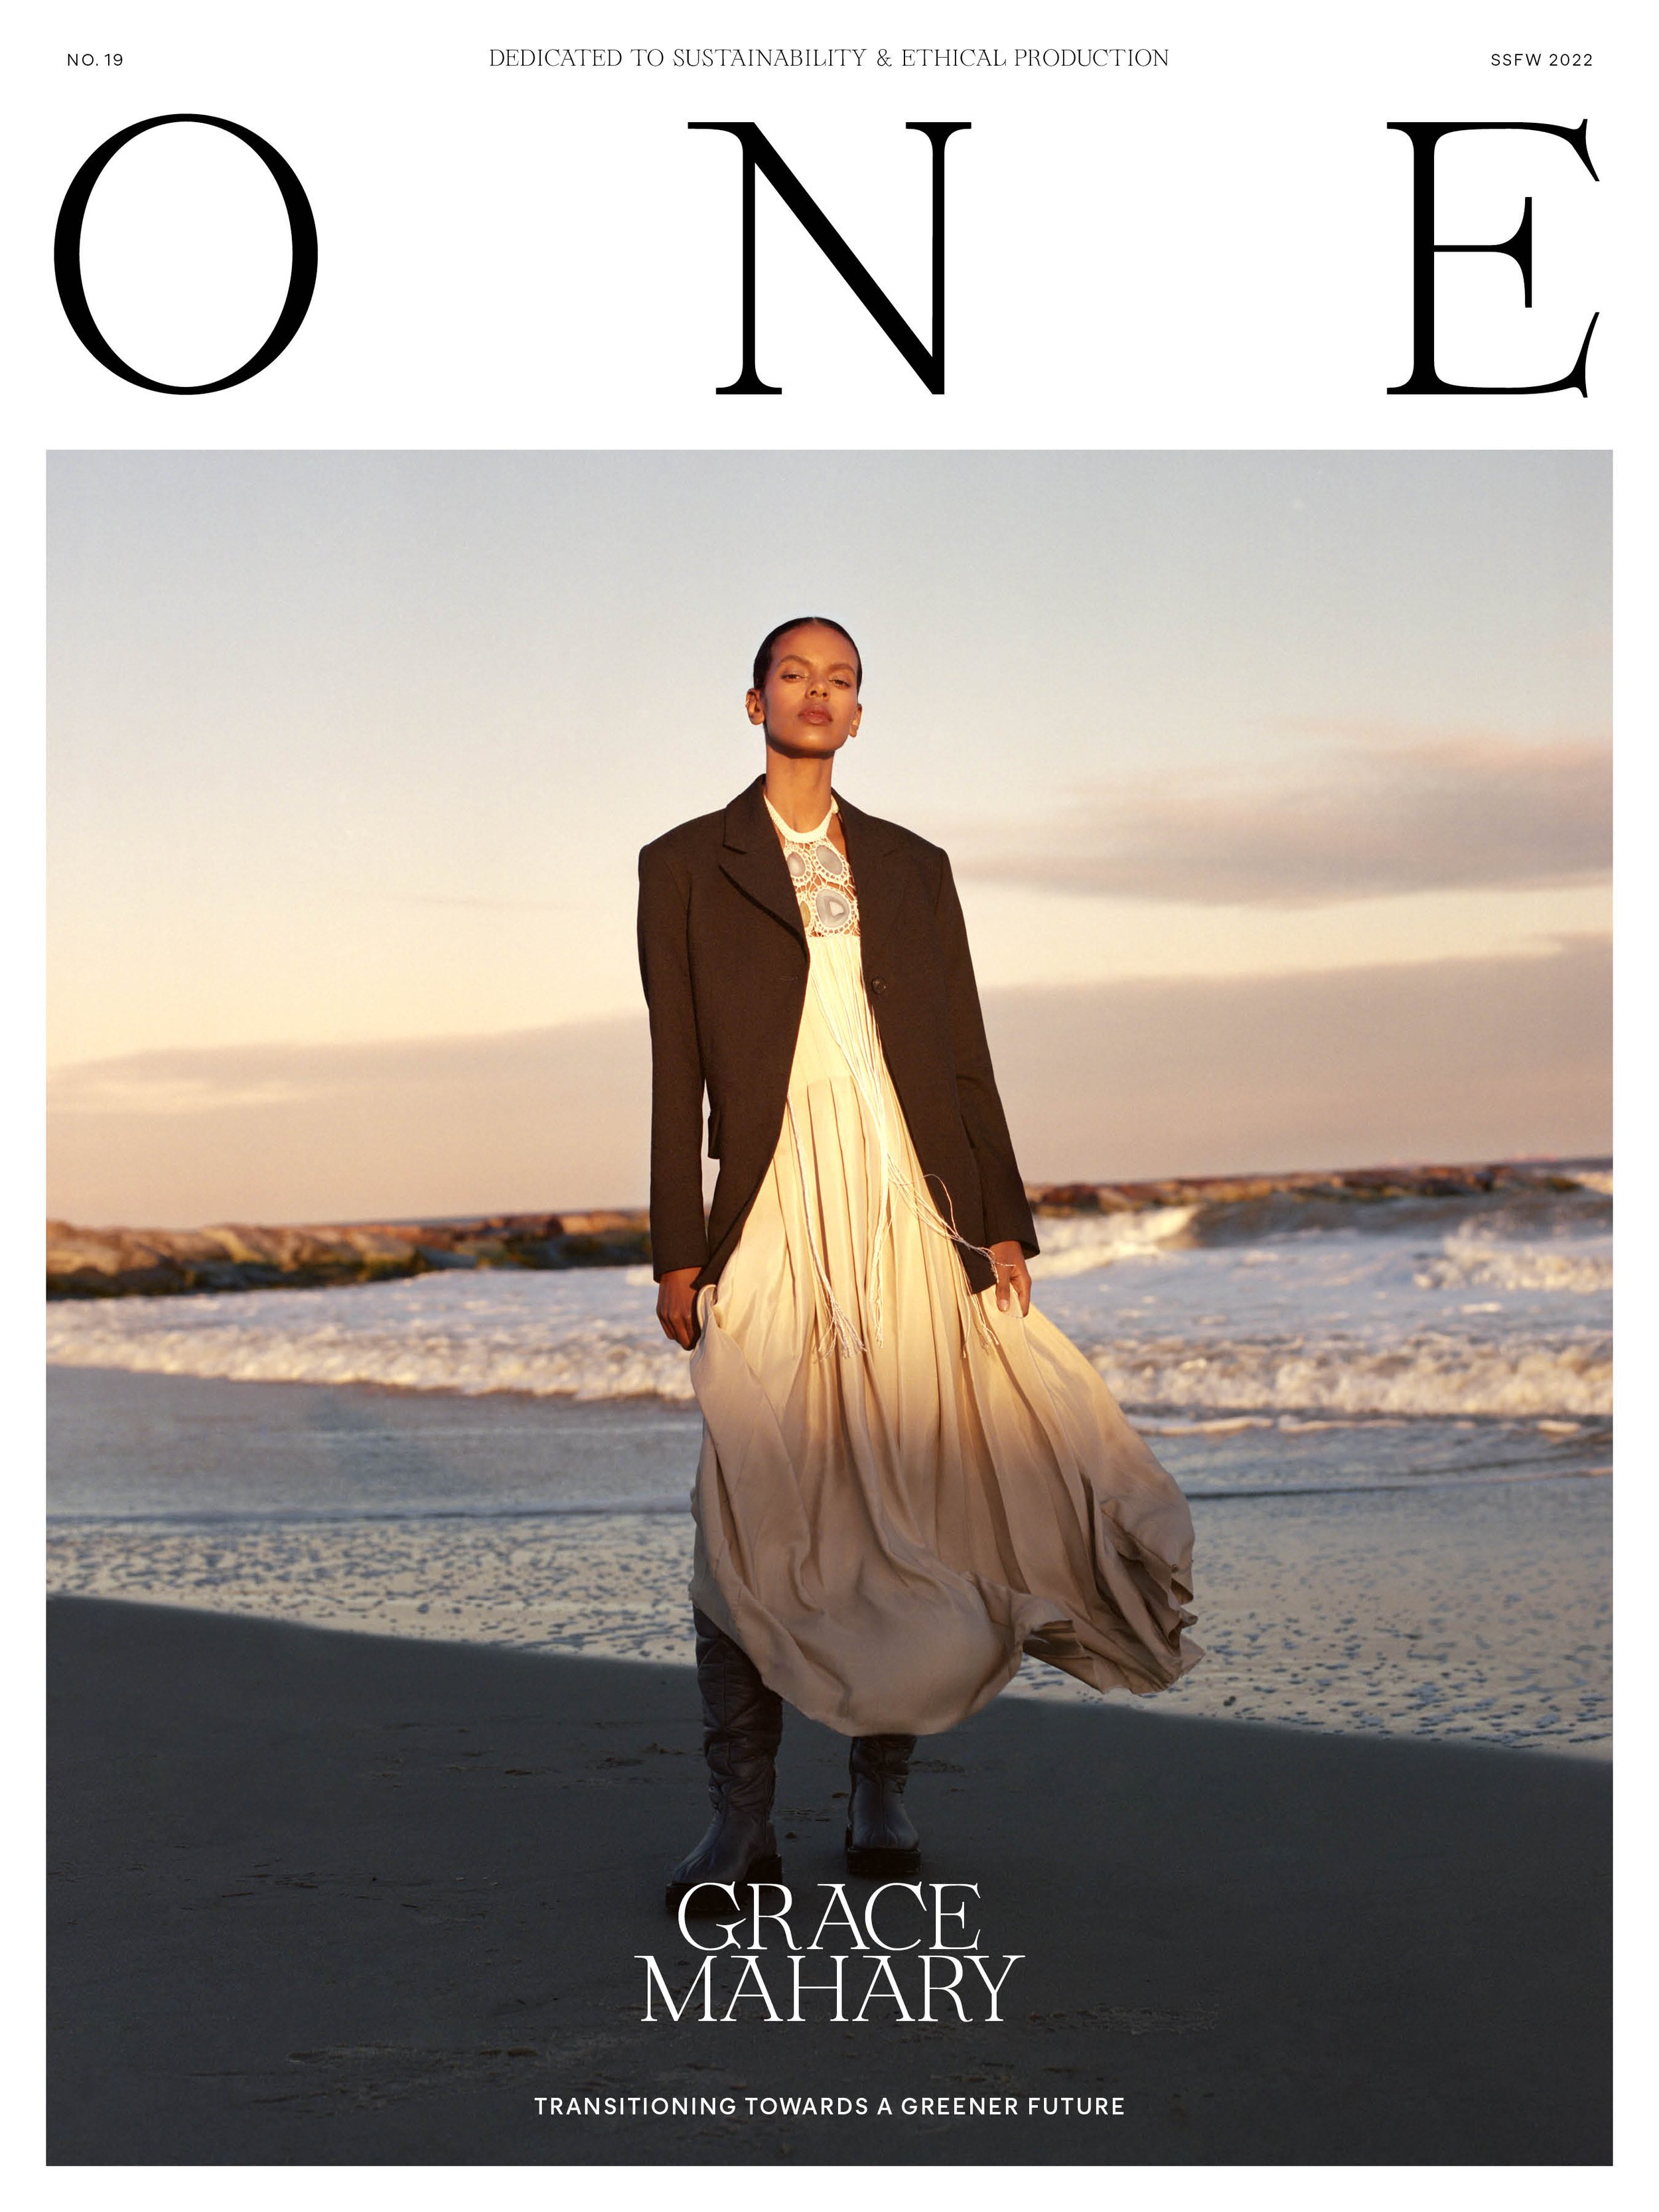 ONE_NO19-Cover-Grace.jpg